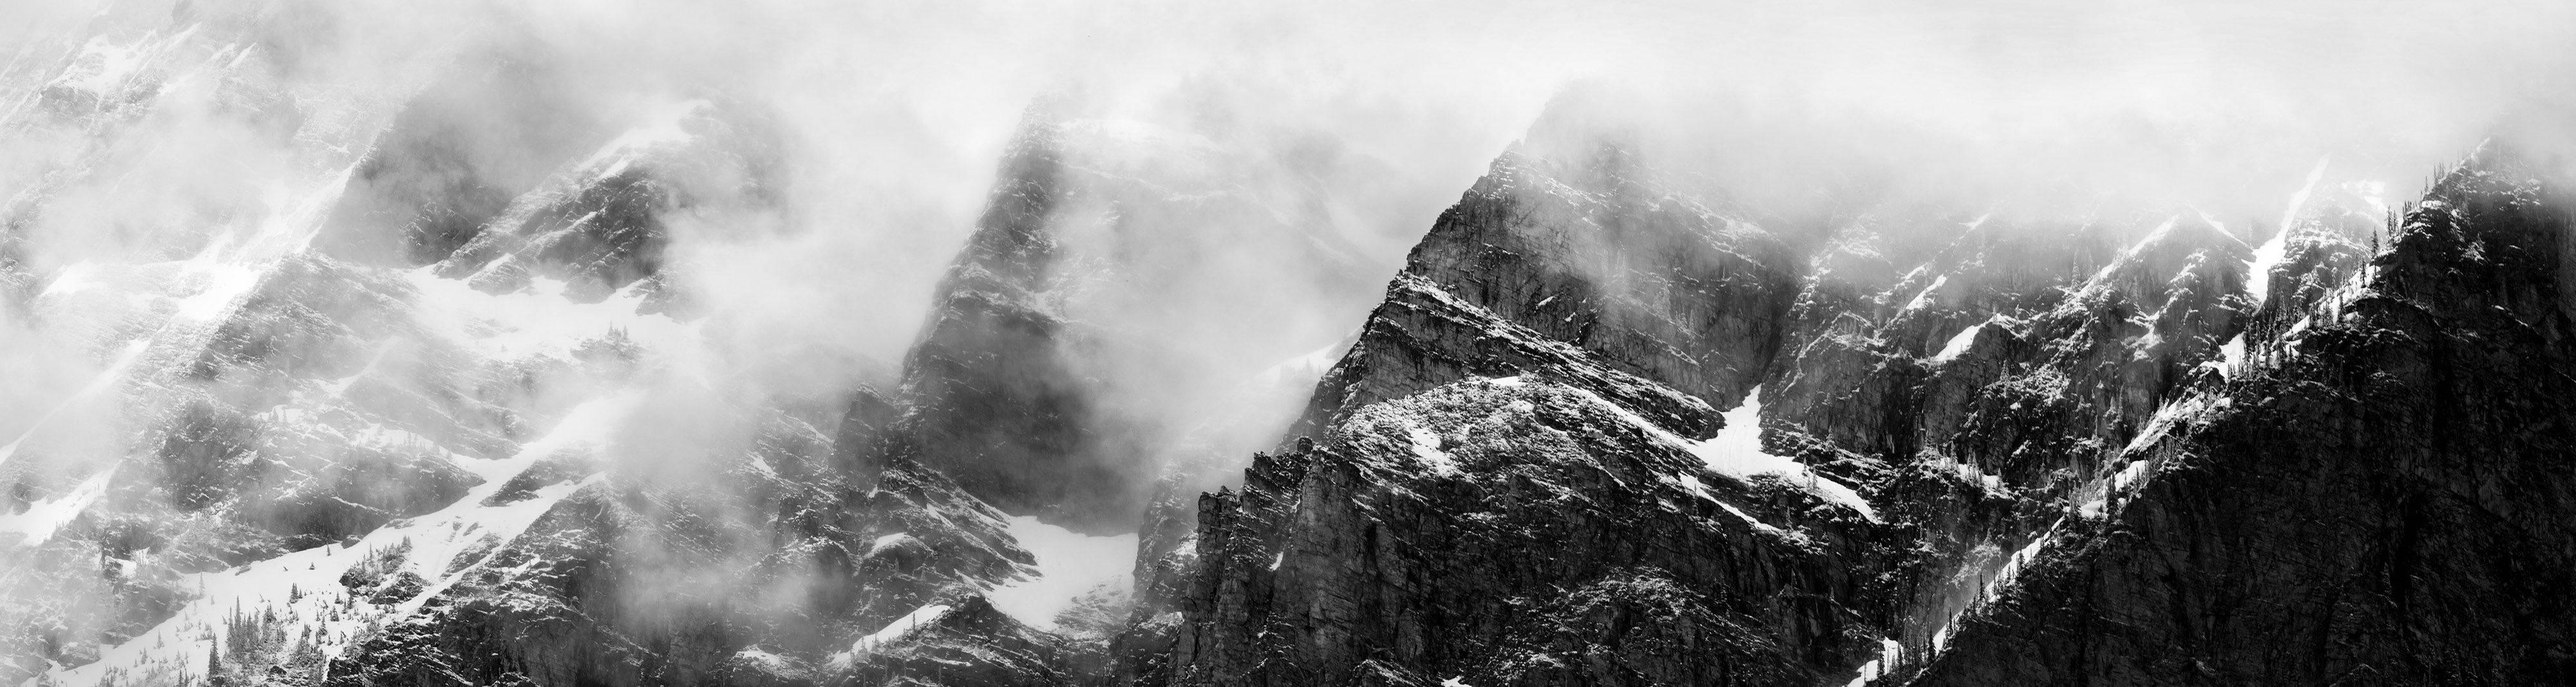 David H. Gibson Black and White Photograph - Mountain Moment III, Canadian Rocky Mountains